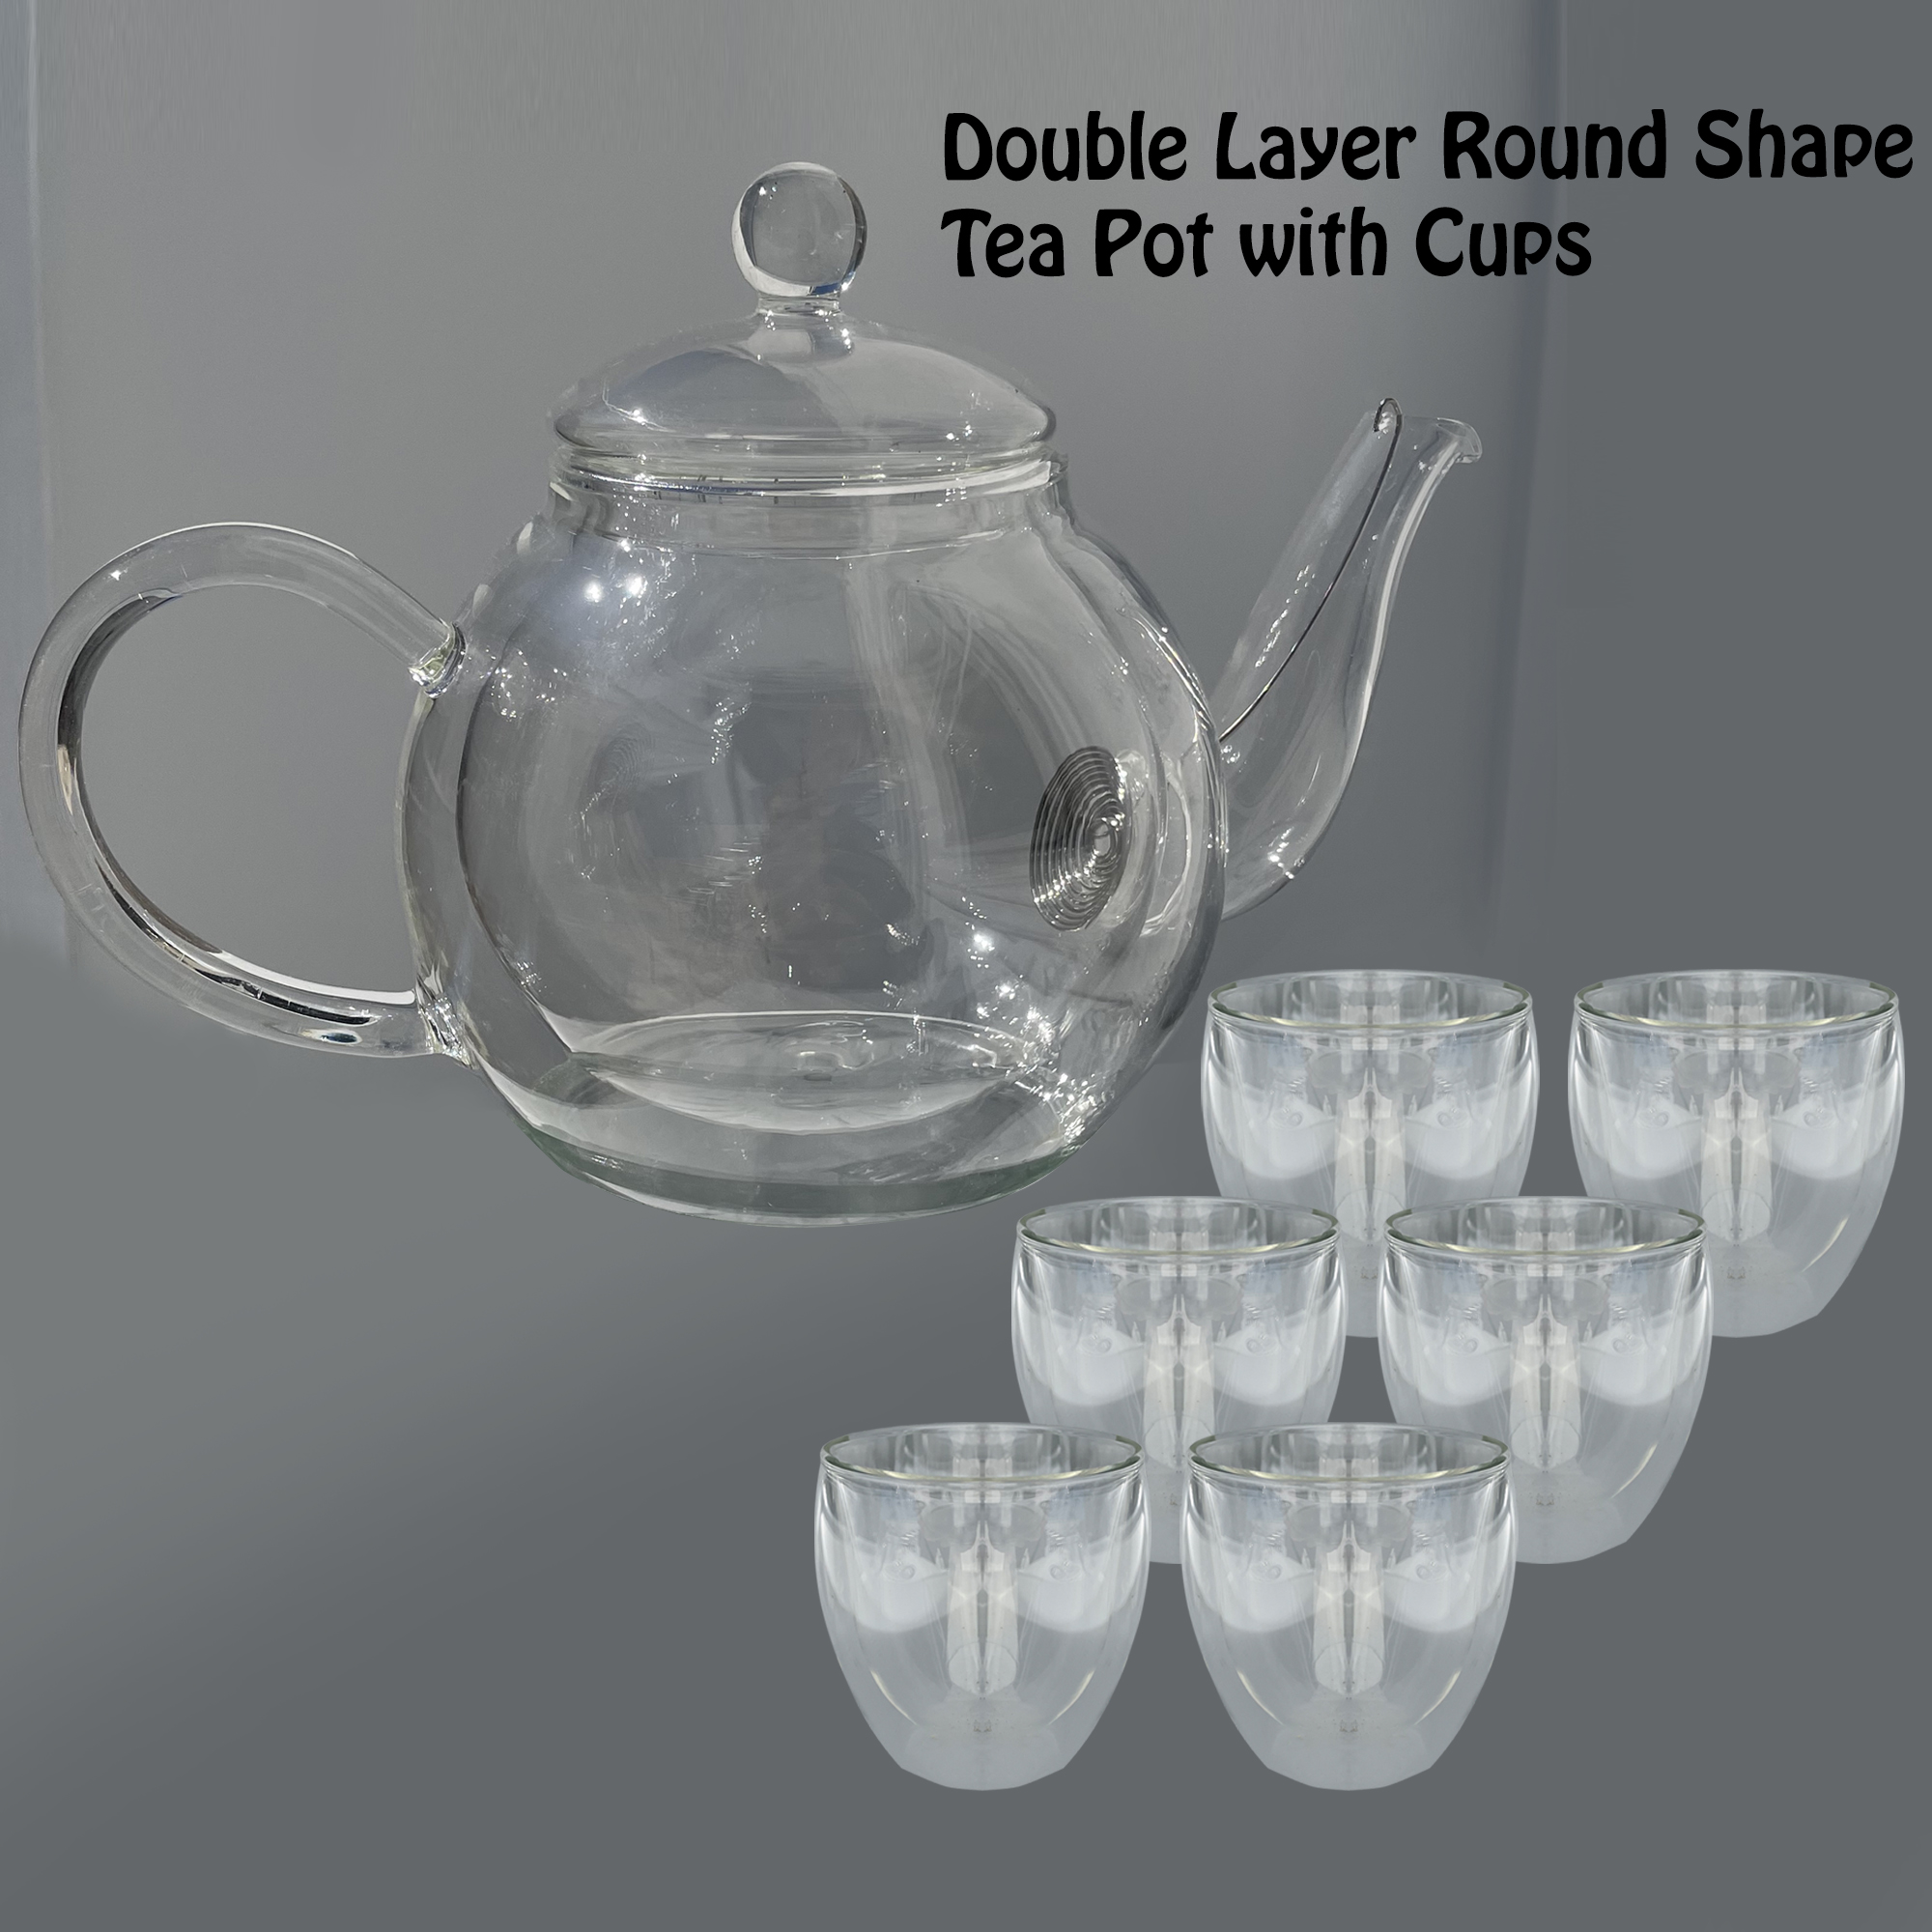 Set of Round Shaped Double Layer Glass Teapot, 530ml with Oval Shape Glass cups-200 ML (pack of 6 cups). Teapot with Infuser and Lid, Heatproof handle